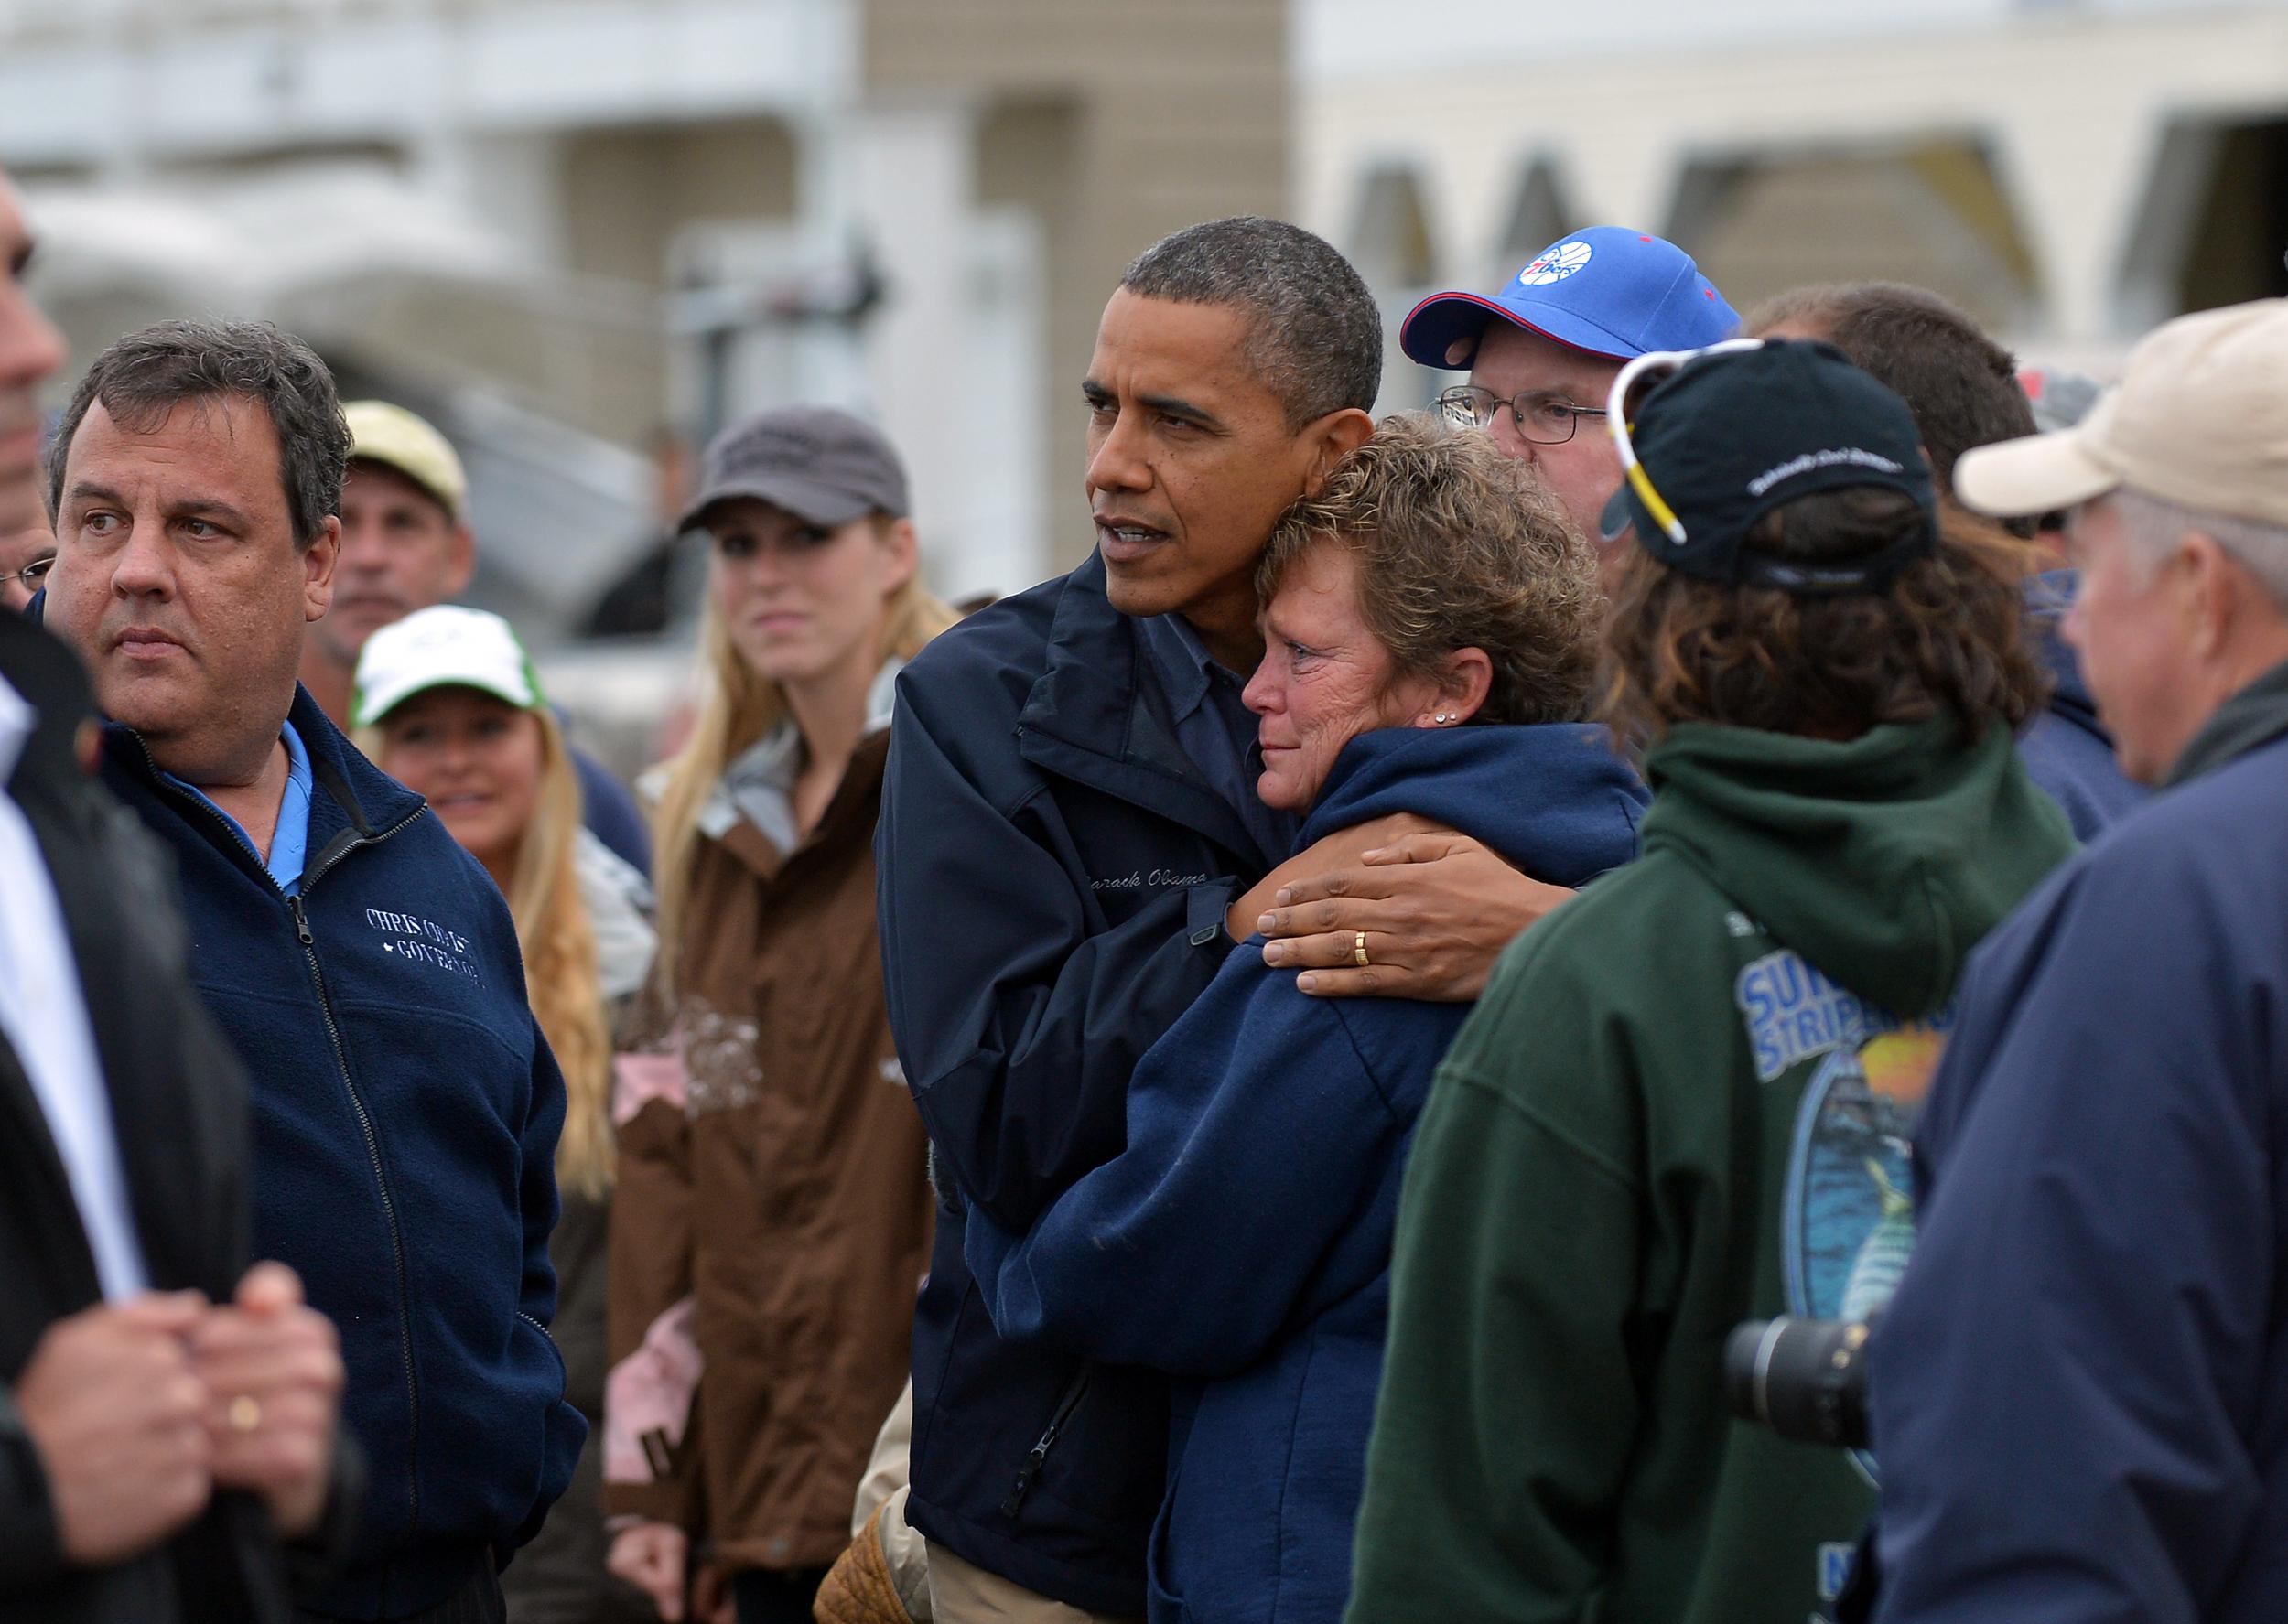 US President Barack Obama comforts Hurricane Sandy victim Dana Vanzant during a visit to New Jersey in October 2012